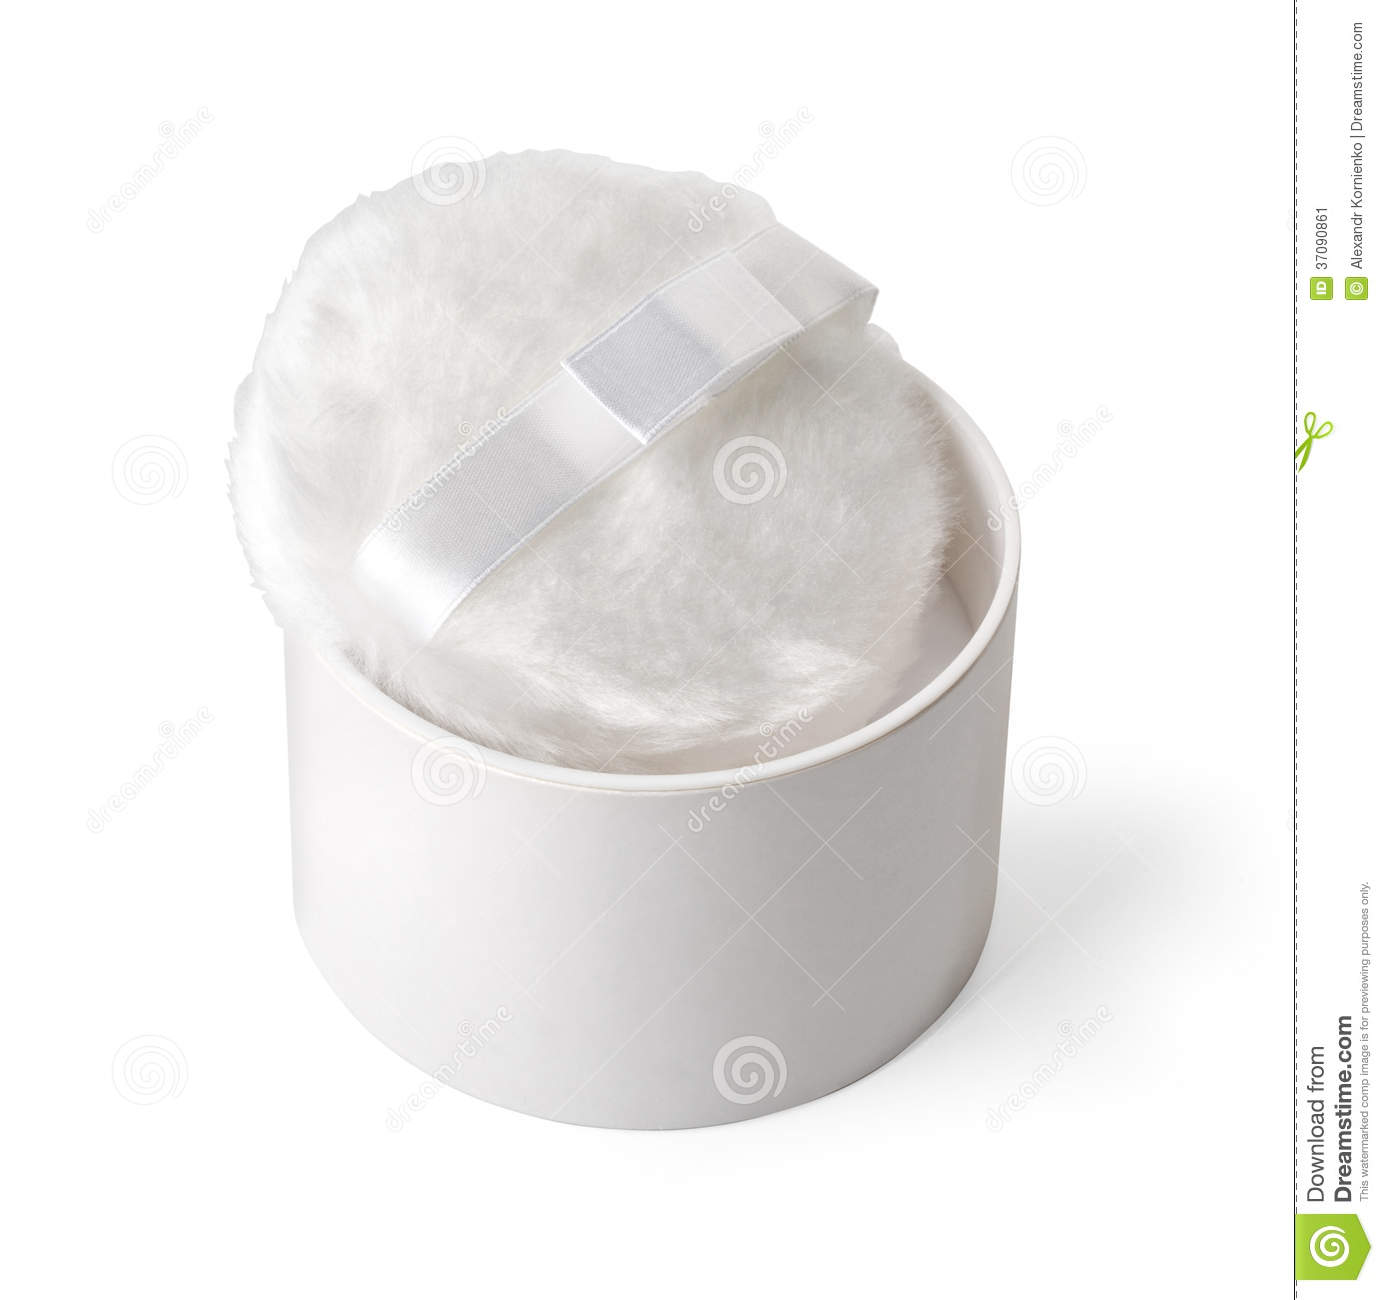 Powder Puff Isolated On White With Clipping Path